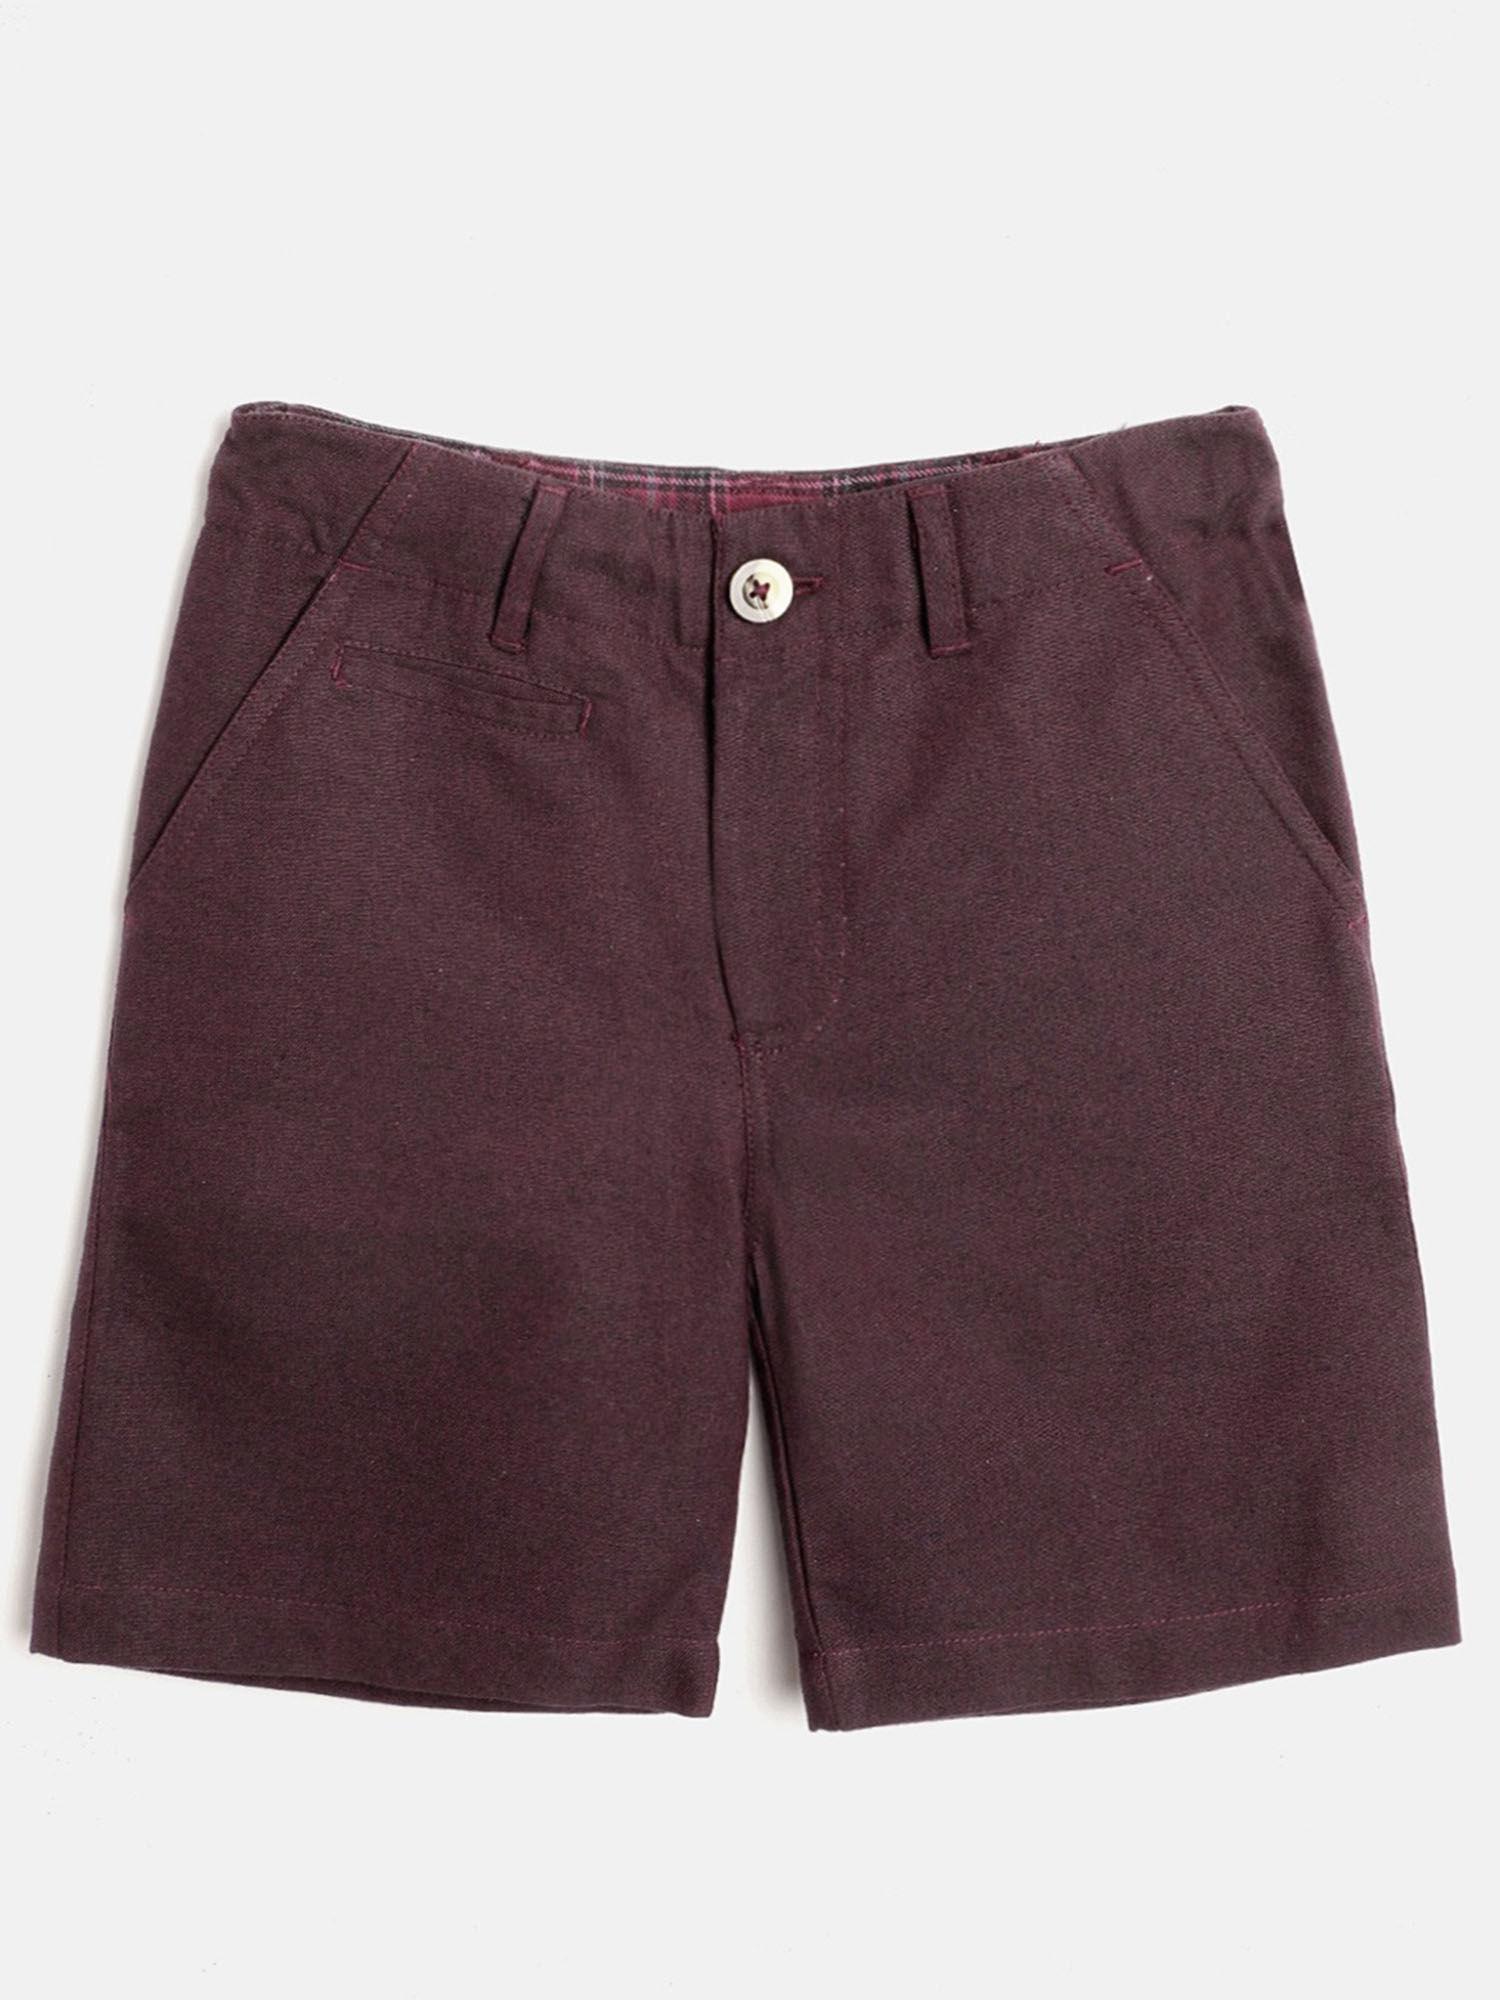 wine solid french cruise chino shorts